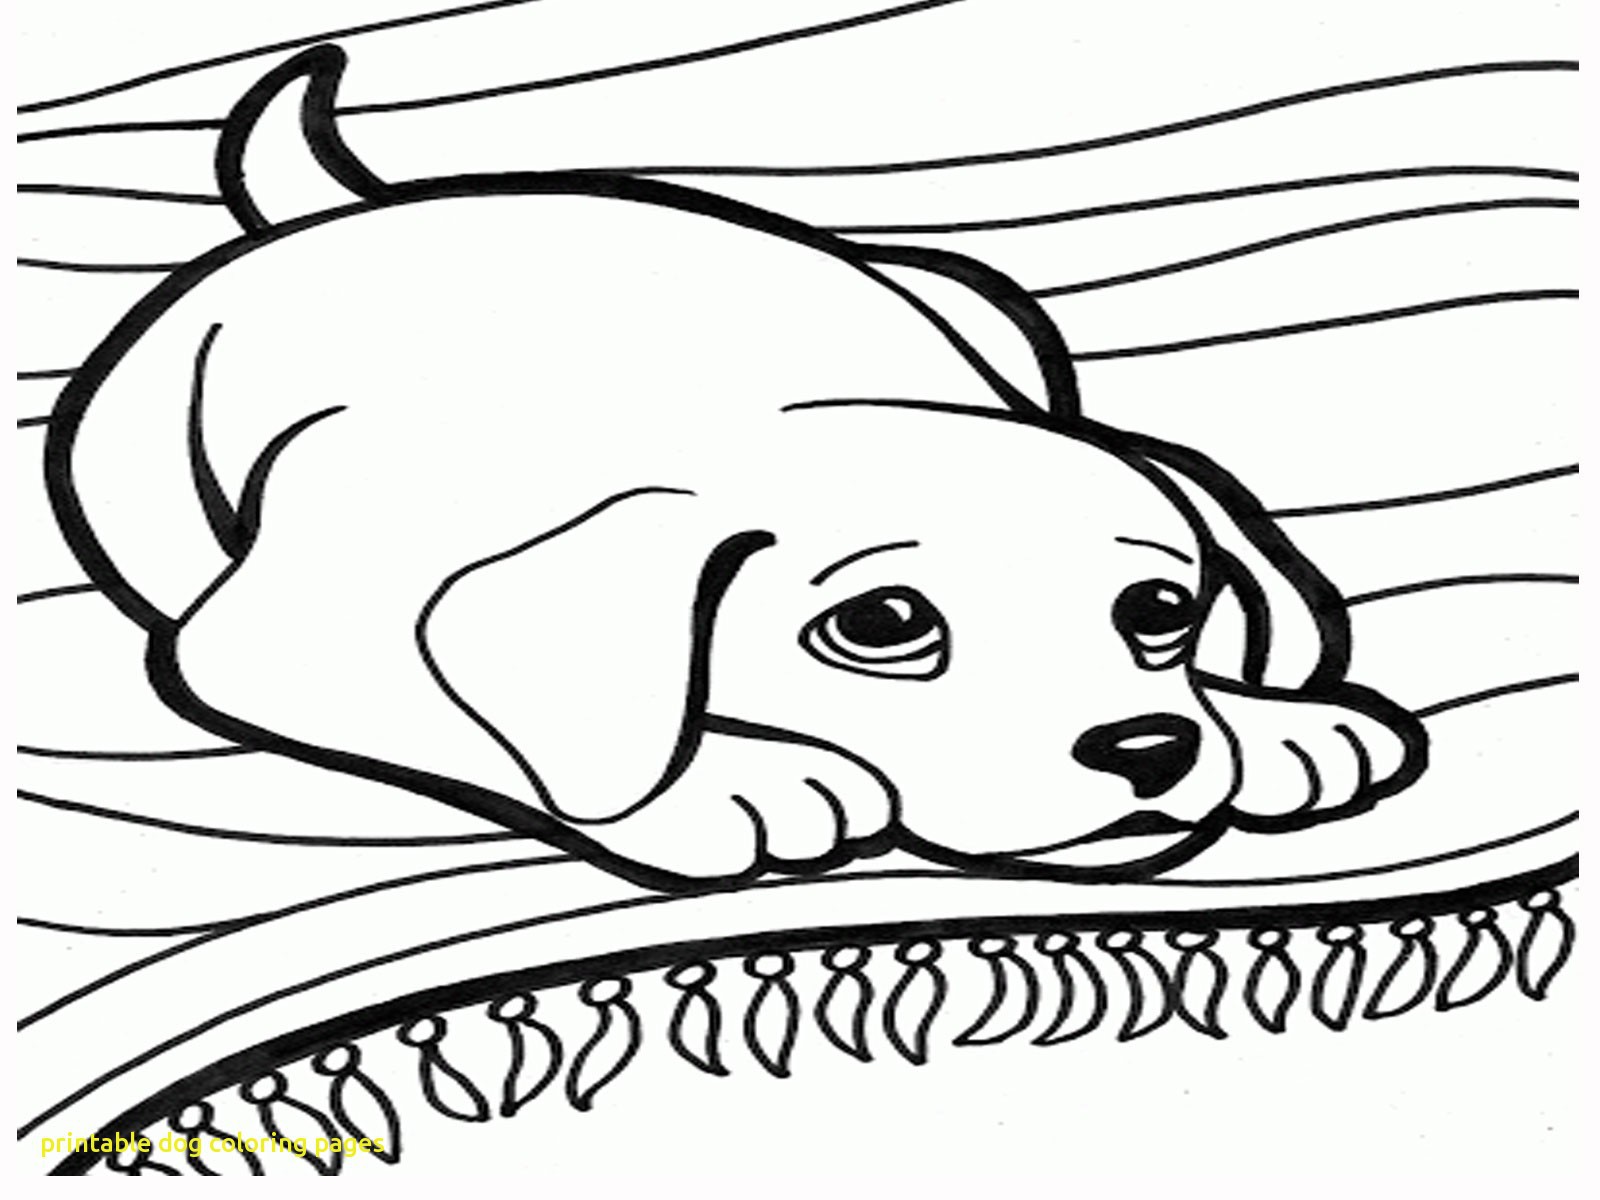 Breakthrough Doggie Coloring Pages Bargain Printable Picture A Dog With Dogs And Cats